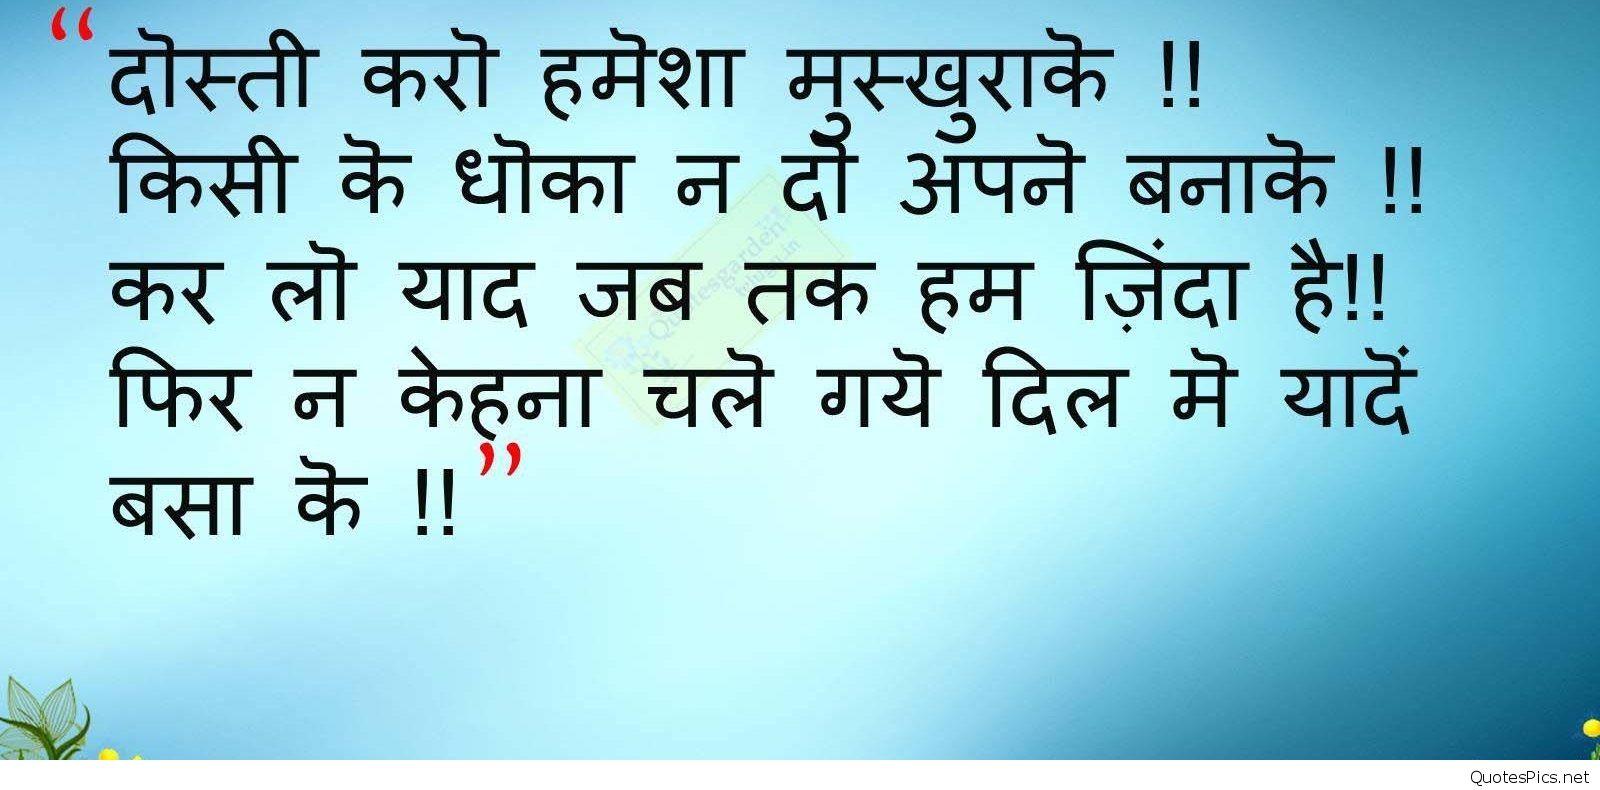 Best hindi indian friendship image quotes and sayings